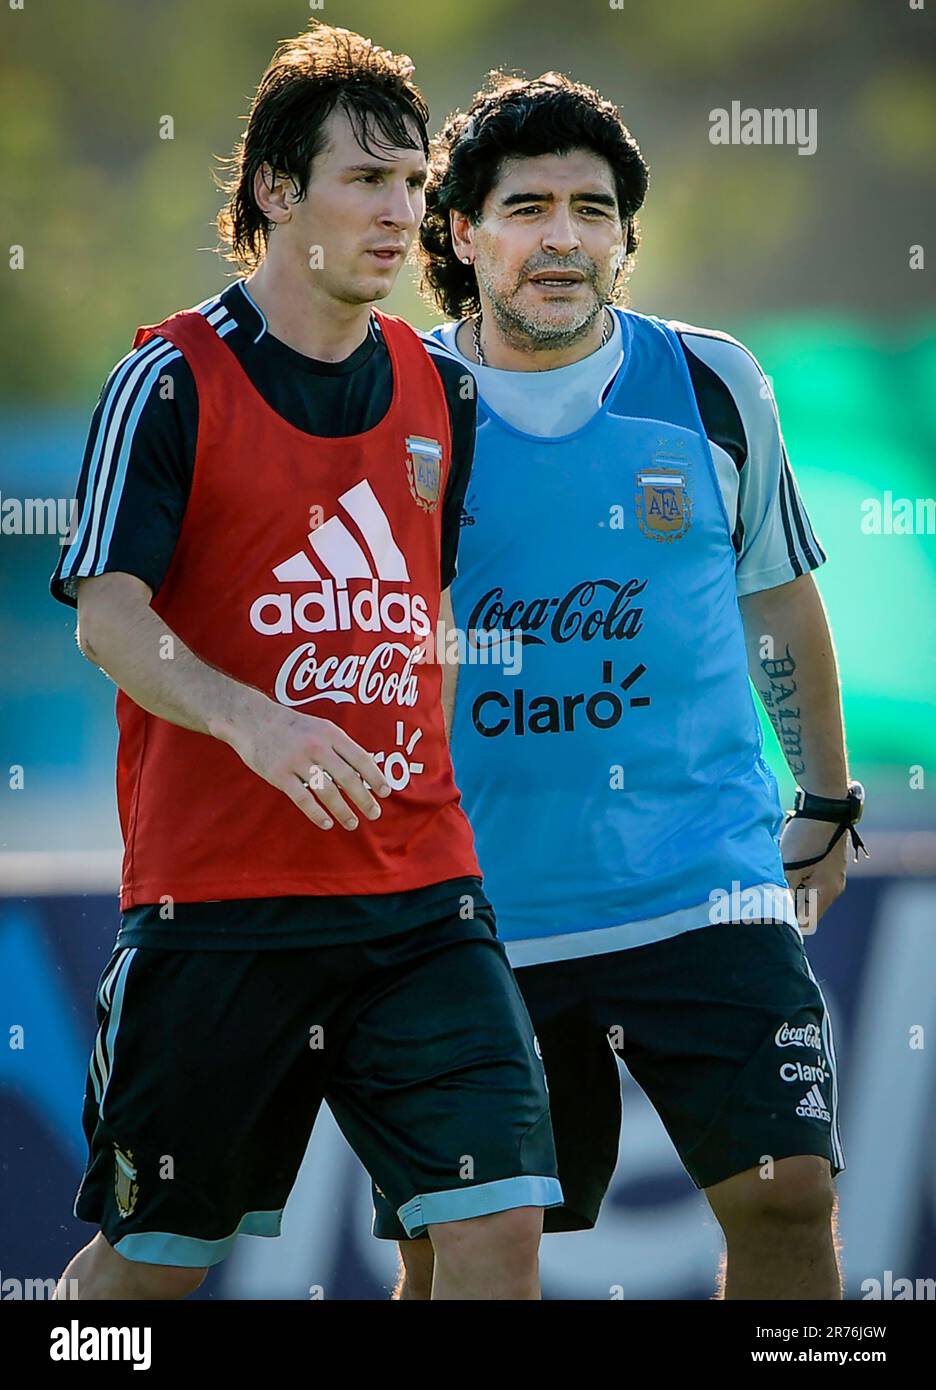 - - -FILE PHOTO - - - - Argentina's football team coach Diego Maradona (R) speaks with forward Lionel Messi during a training session in Ezeiza, Buenos Aires on March 24, 2009. Argentina will face Venezuela next March 28 for their FIFA World Cup South Africa 2010 qualifier at the Monumental stadium in Buenos Aires, Argentina.  (Photo by Alejandro Pagni/PHOTOXPHOTO) Stock Photo